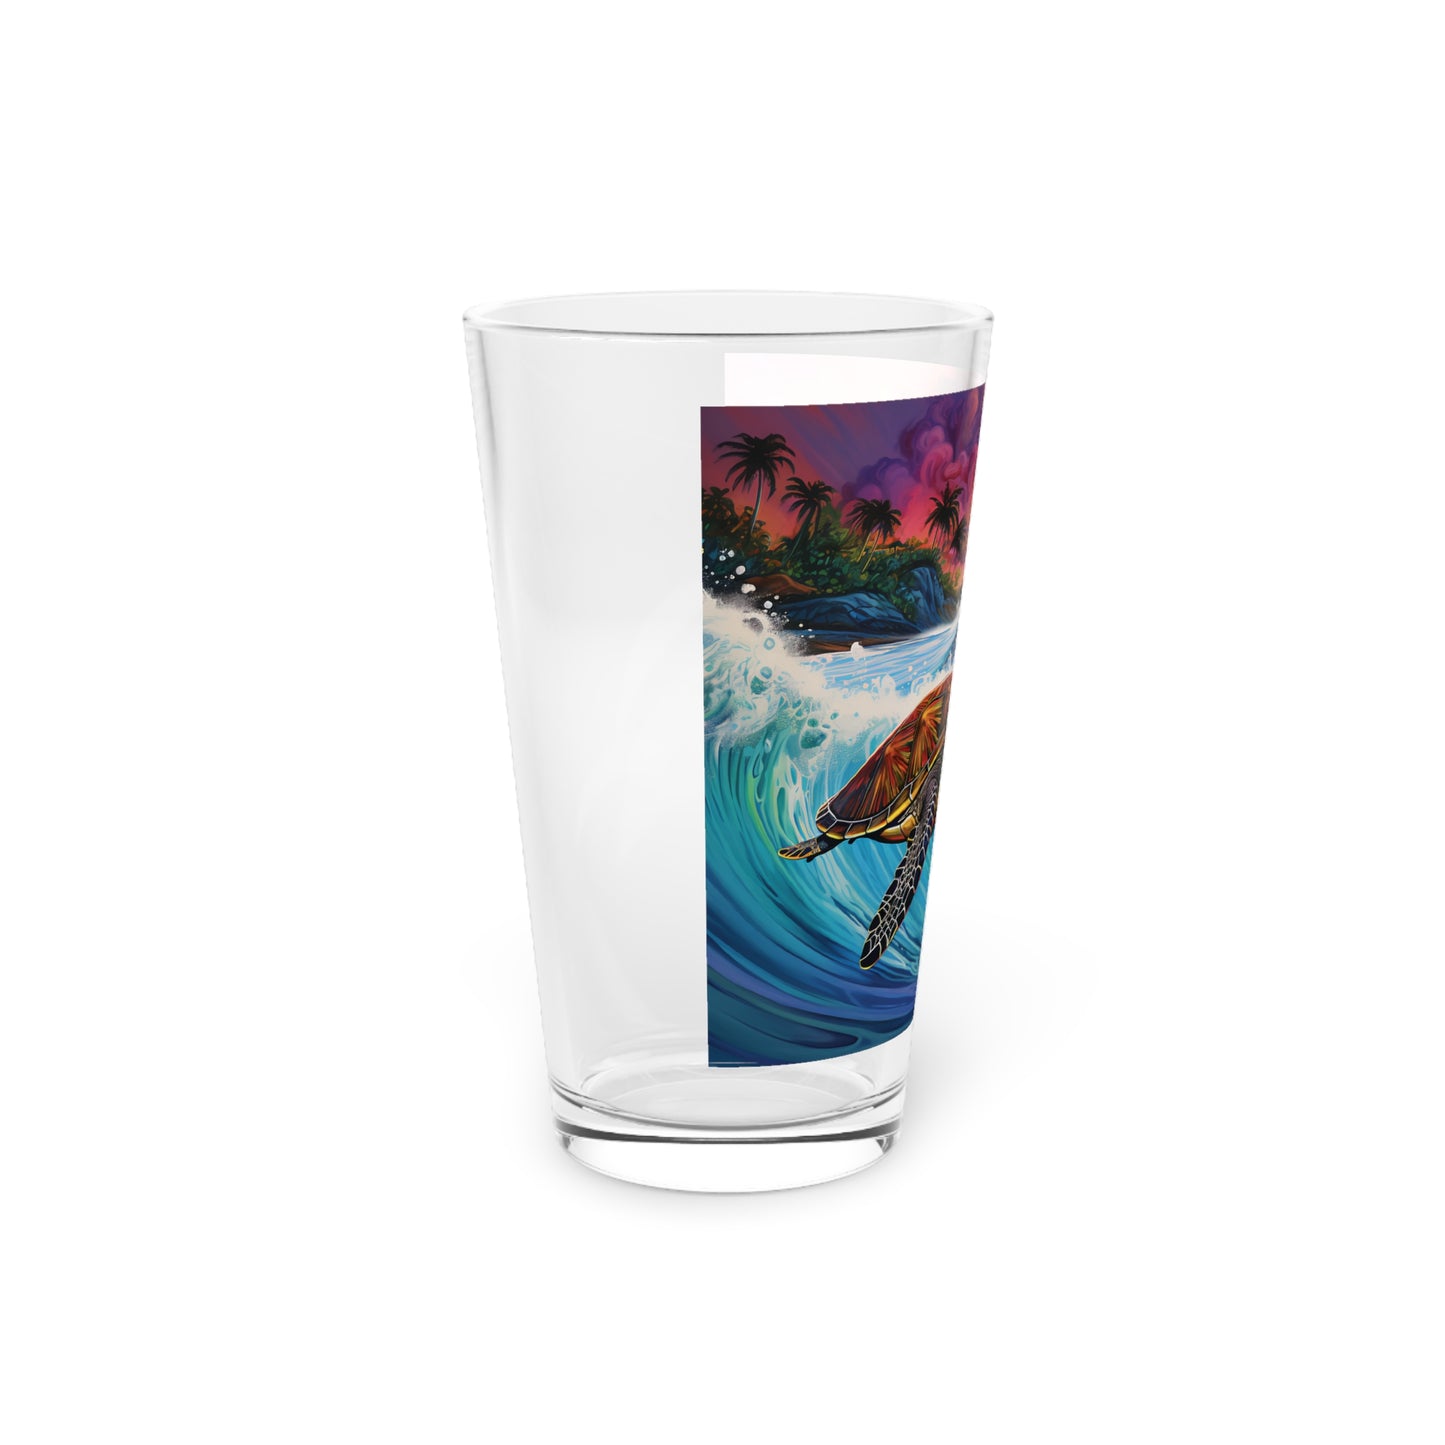 Make a splash with our Turtle Surfing Color Wave Pint Glass, showcasing Waves Design #028. This 16oz glass celebrates the harmony of turtles and ocean waves, a masterpiece exclusively crafted by Stashbox for those who appreciate marine wonders.